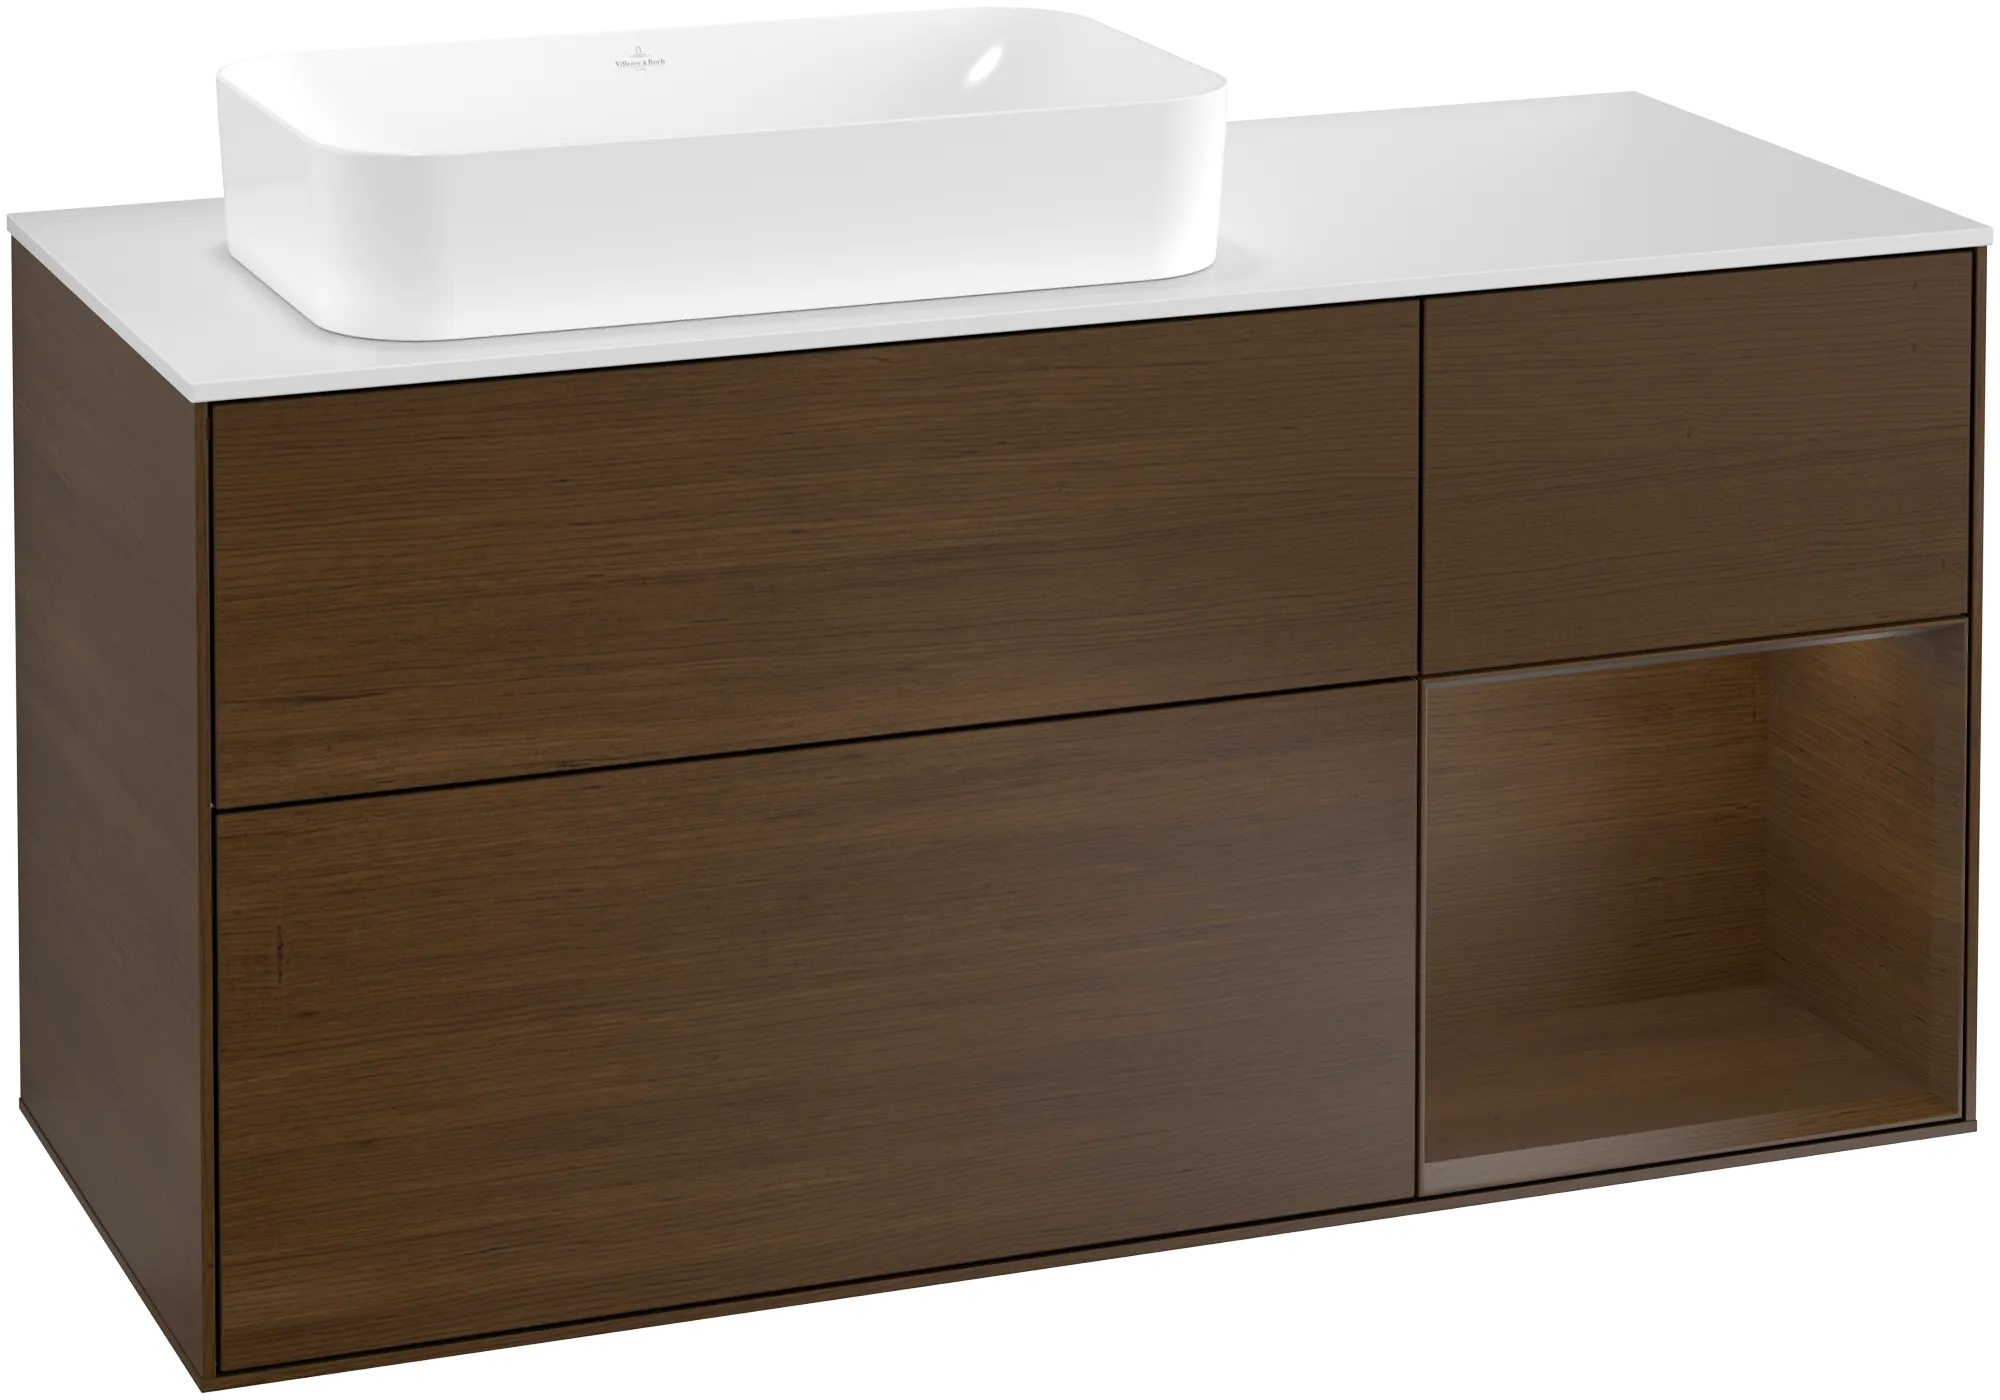 Picture of VILLEROY BOCH Finion Vanity unit, with lighting, 3 pull-out compartments, 1200 x 603 x 501 mm, Walnut Veneer / Walnut Veneer / Glass White Matt #G281GNGN